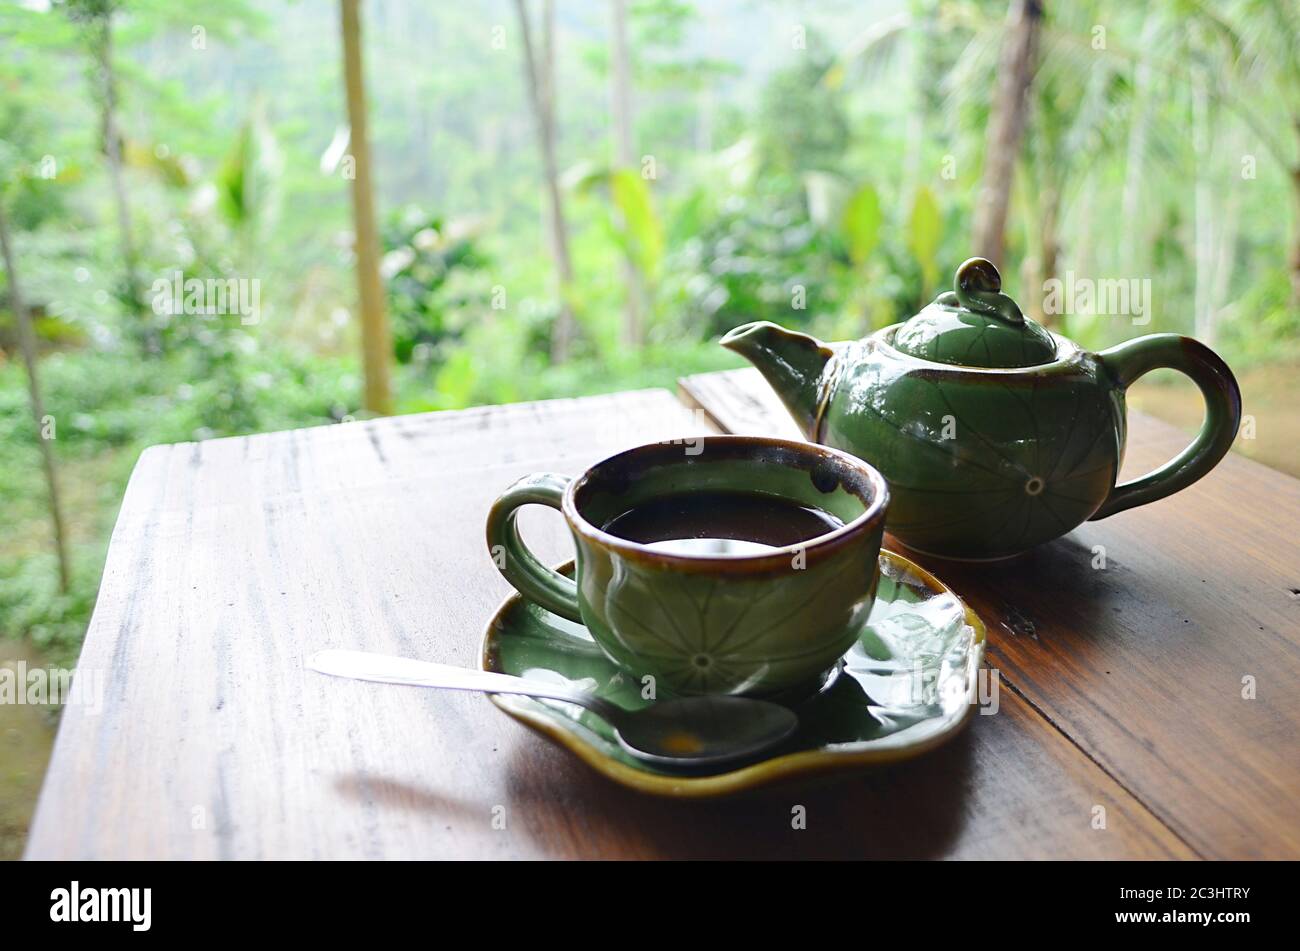 Relaxing afternoon tea of Kopi Lumak. It specialty coffee that is digested by, fermented within, and excreted by the Asian palm civet. Stock Photo